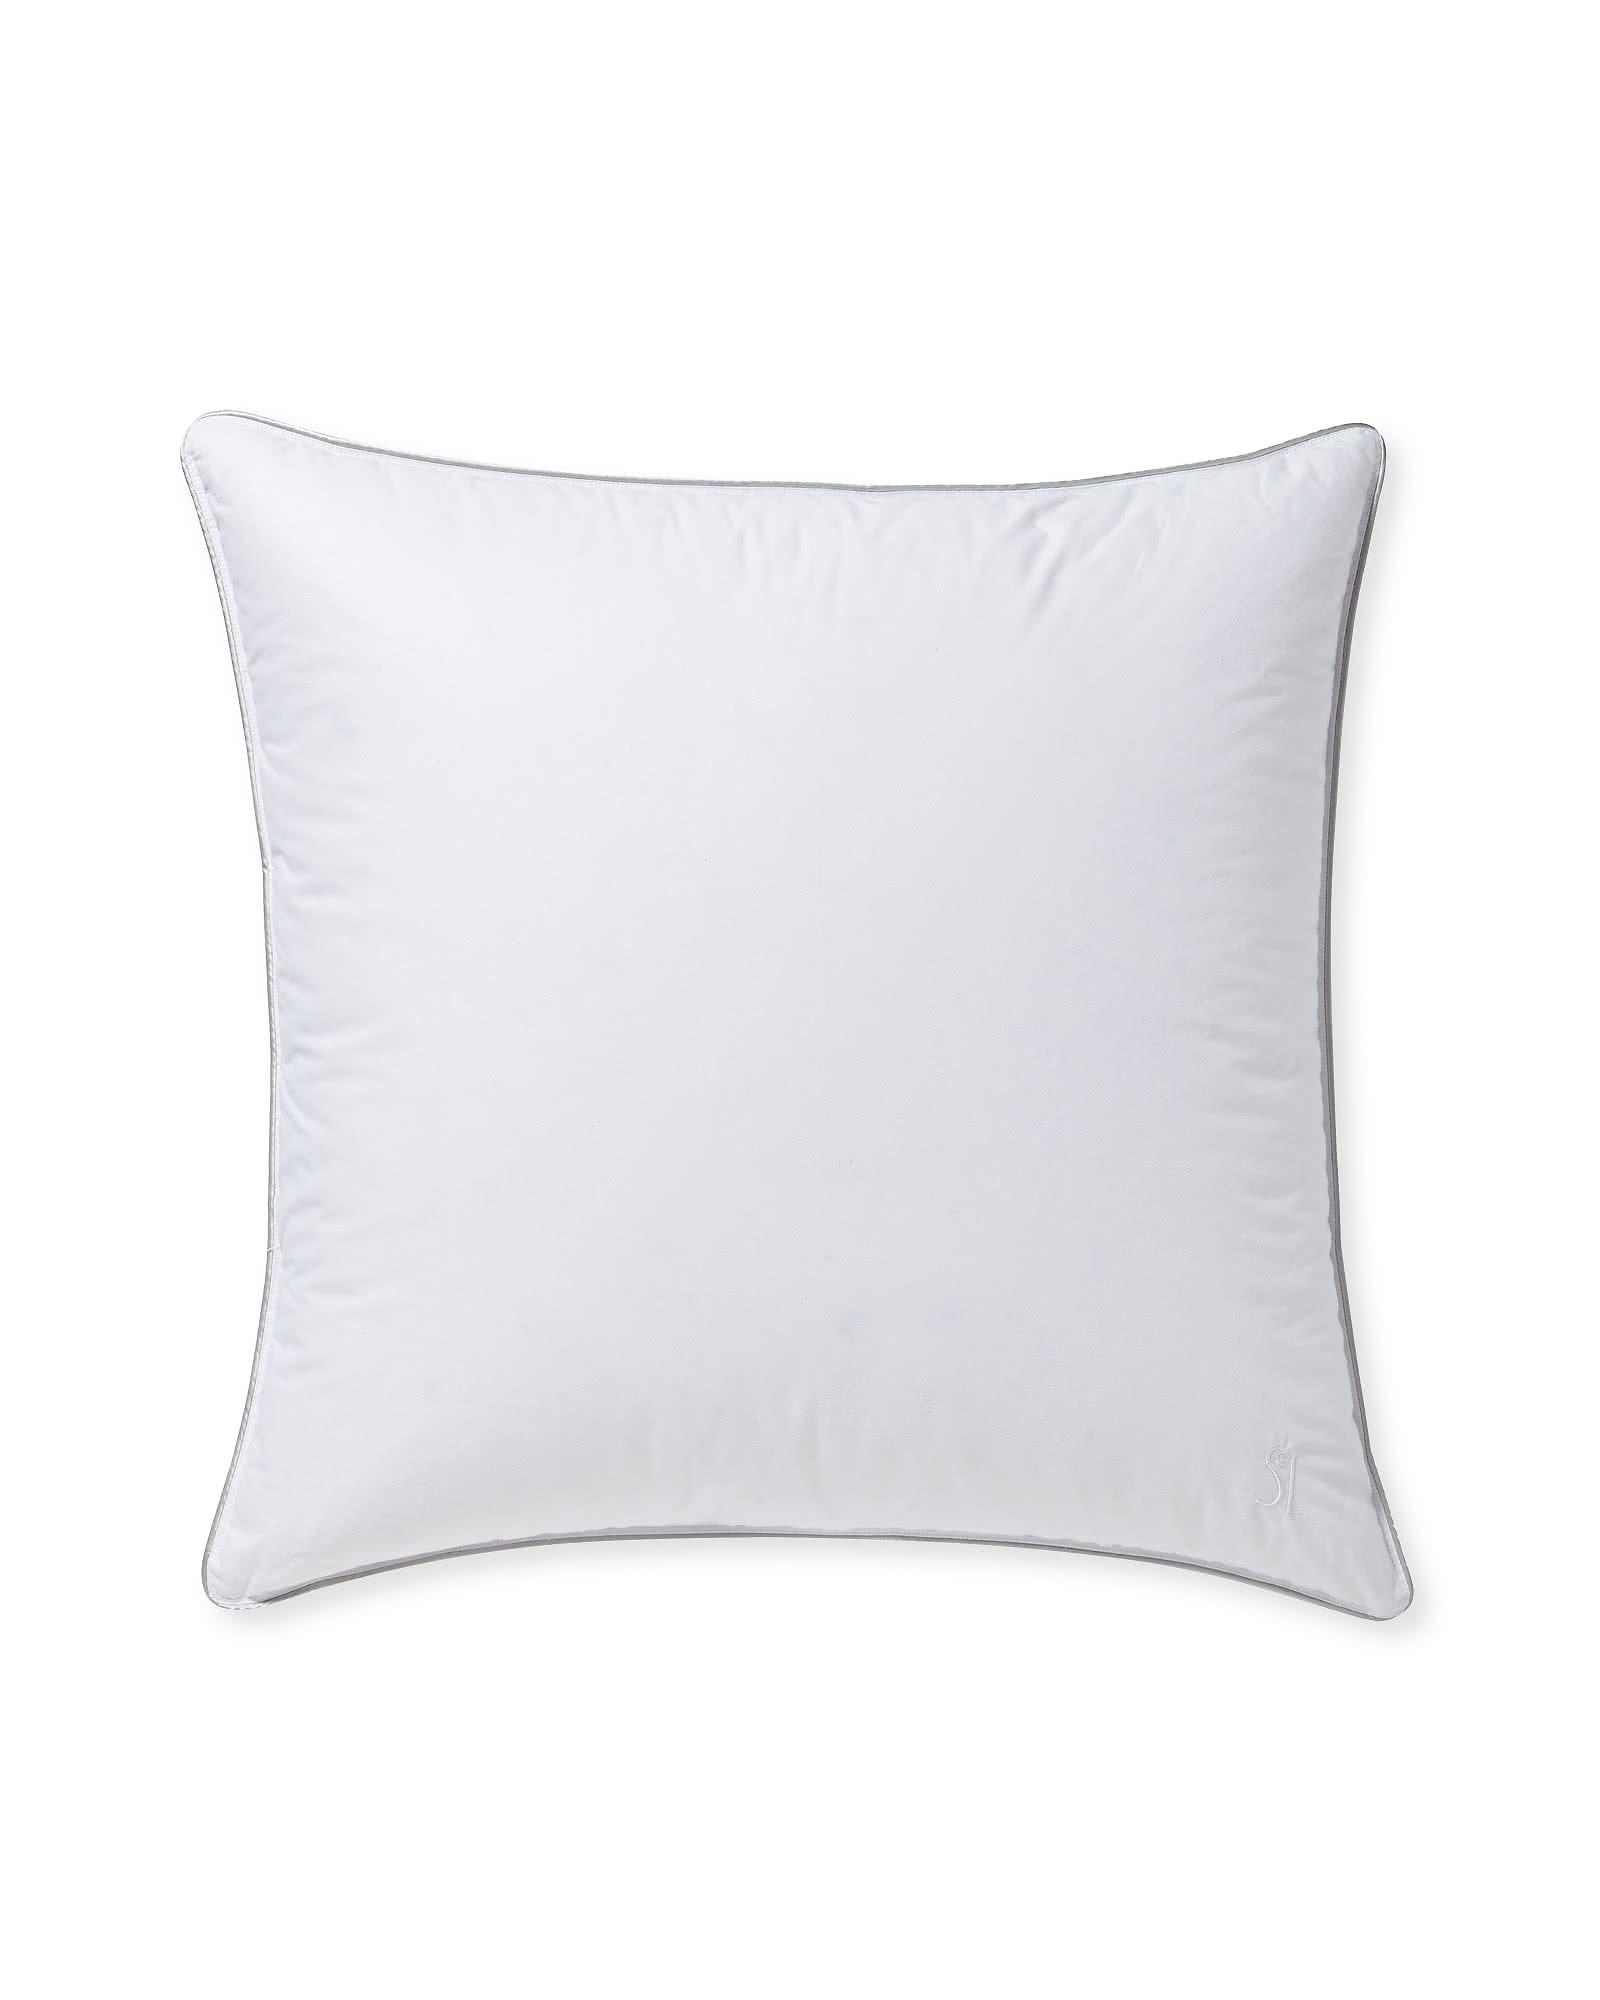 Shop Primaloft® Euro Pillow Insert (SERENA & LILY), Quantity: 2 from Serena & Lily on Openhaus